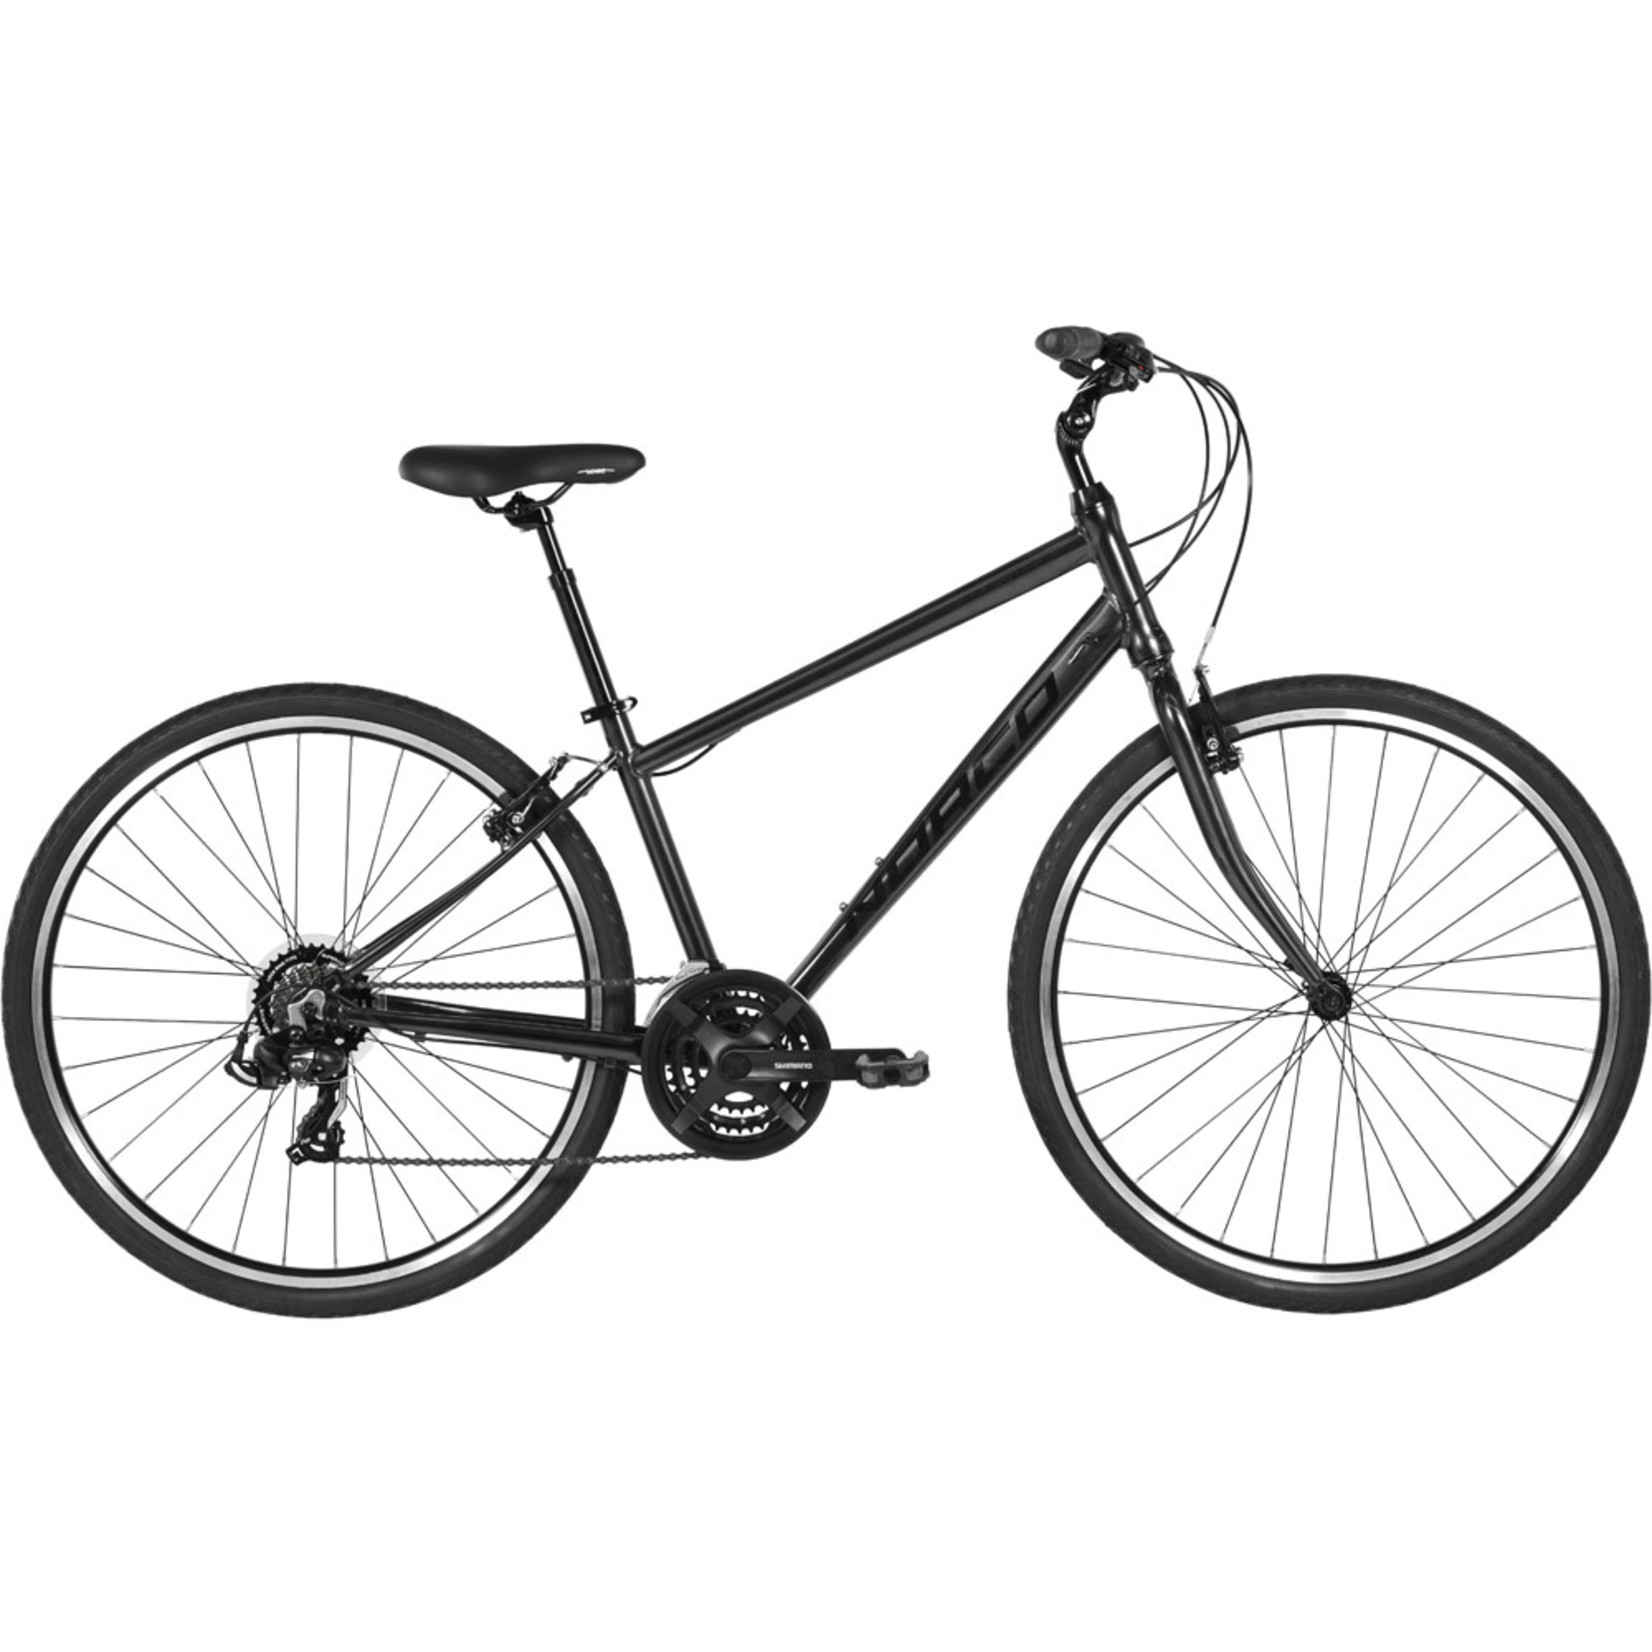 Norco Norco 2021 Yorkville Flat Bar Road Bike - Charcoal/Black - Large